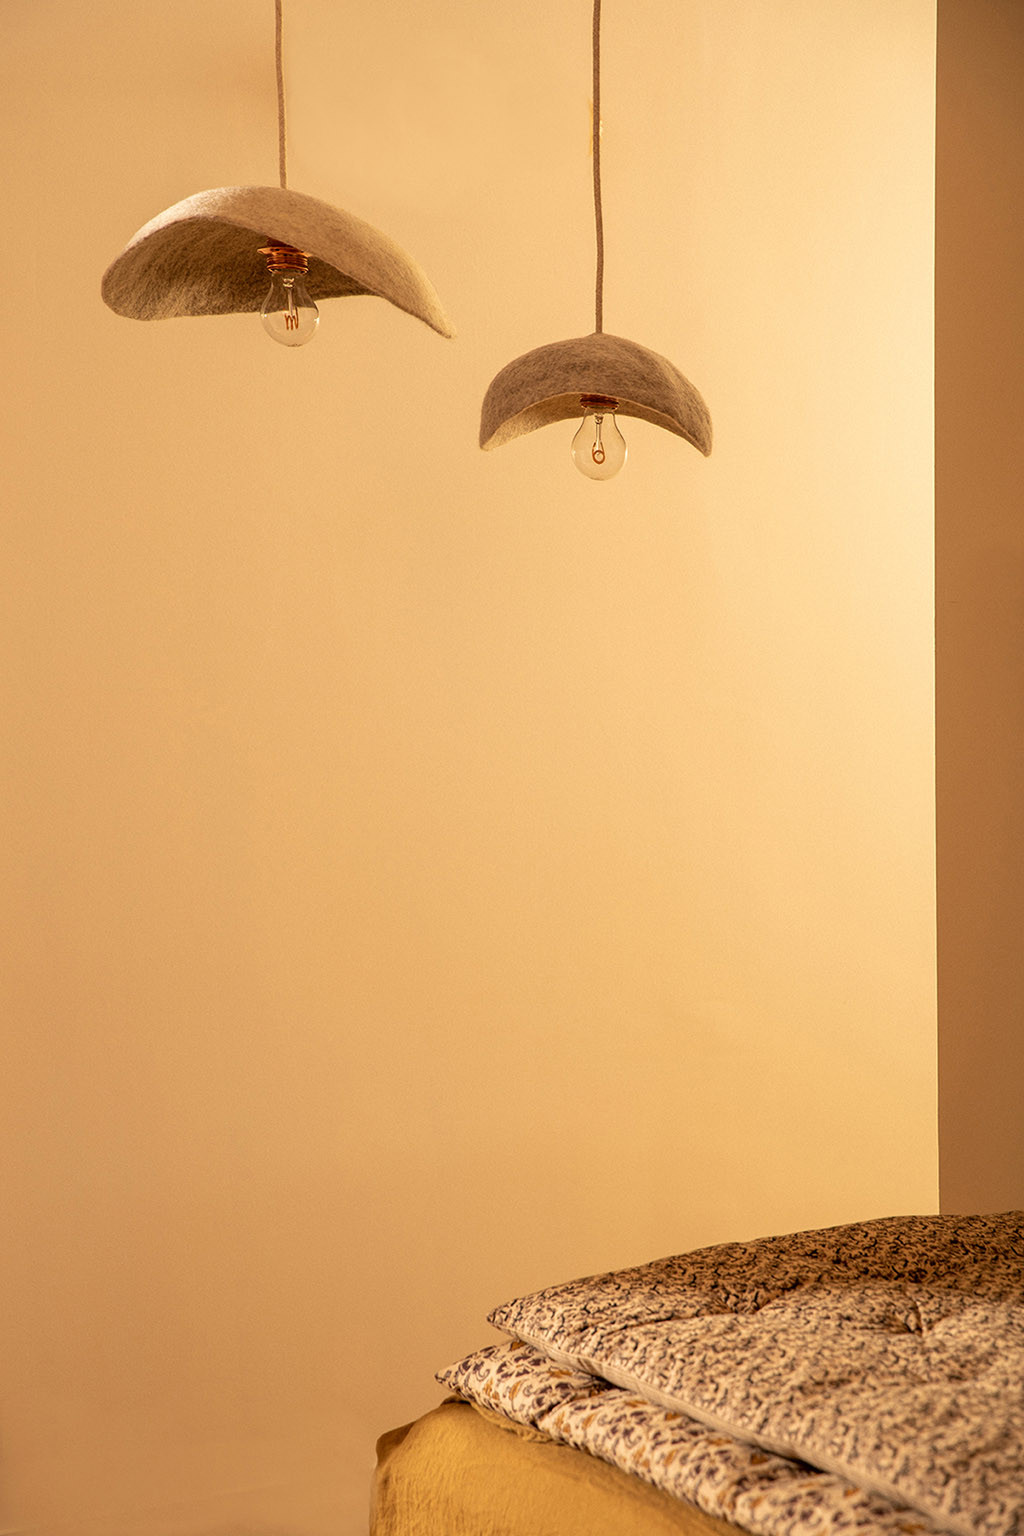 Warm atmosphere in the house with these felt hanging lights